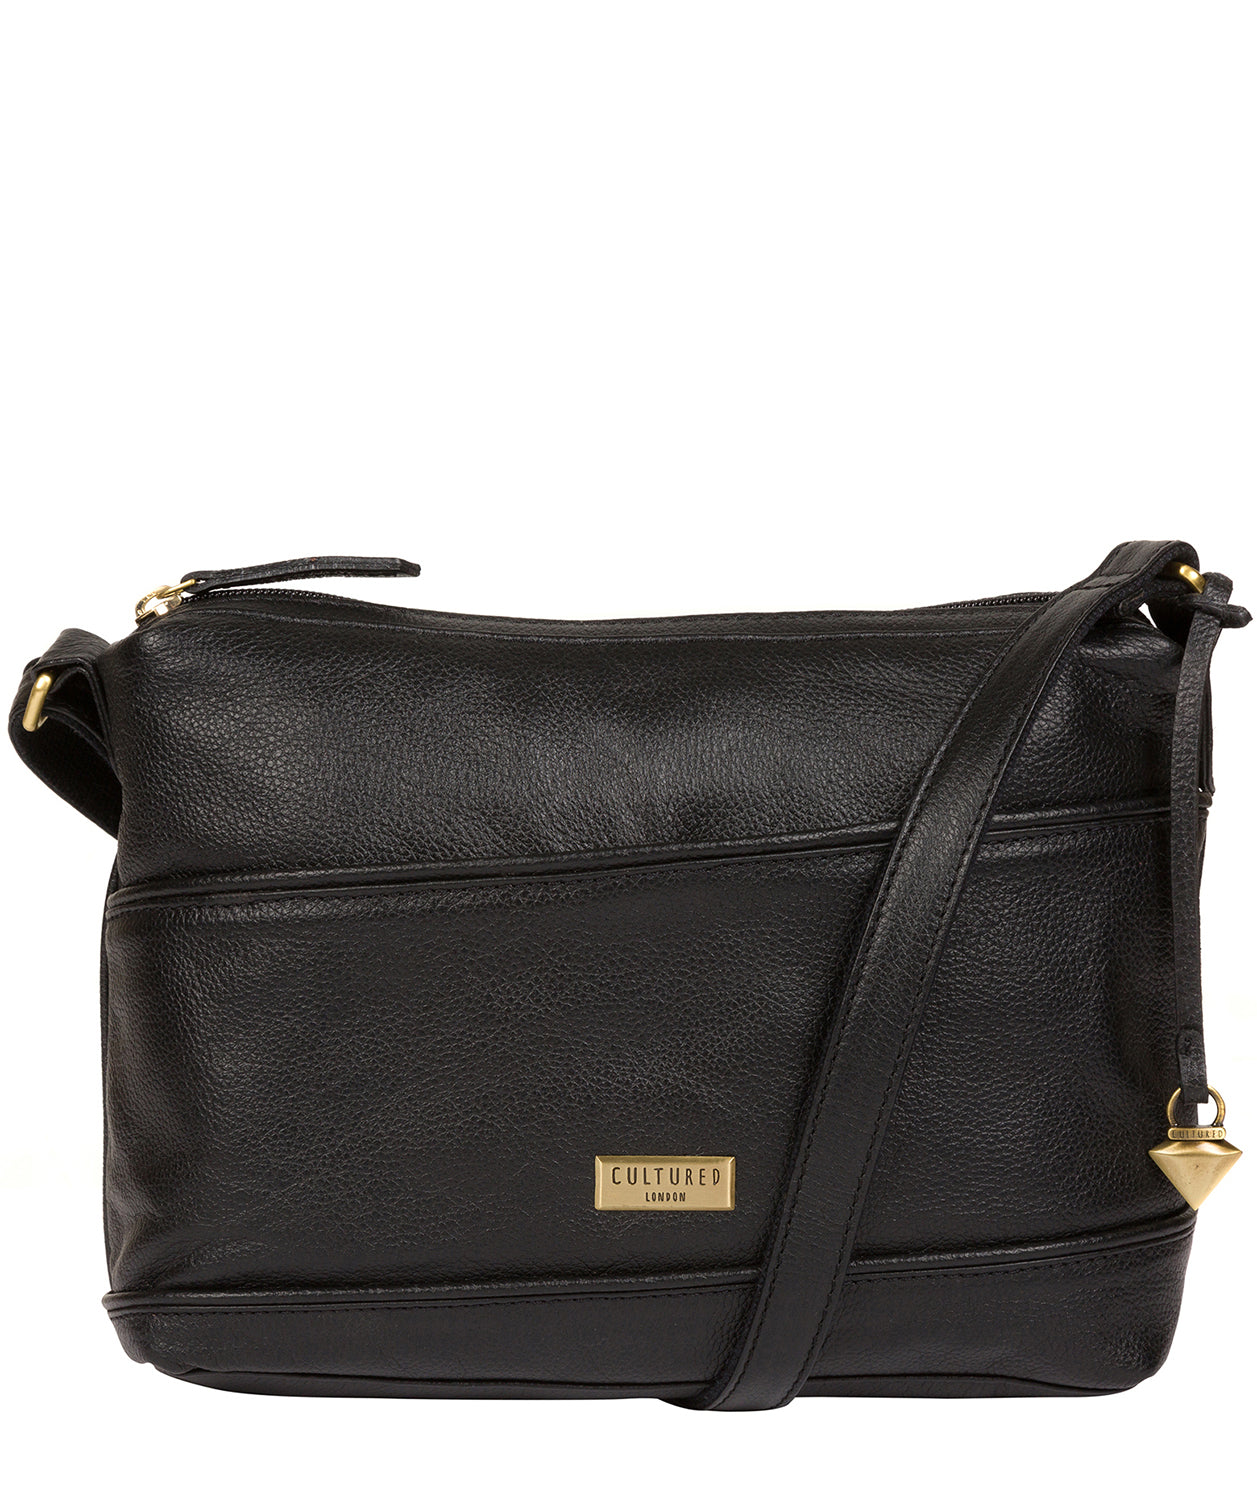 Black Leather Shoulder Bag 'Duana' by Cultured London – Pure Luxuries ...